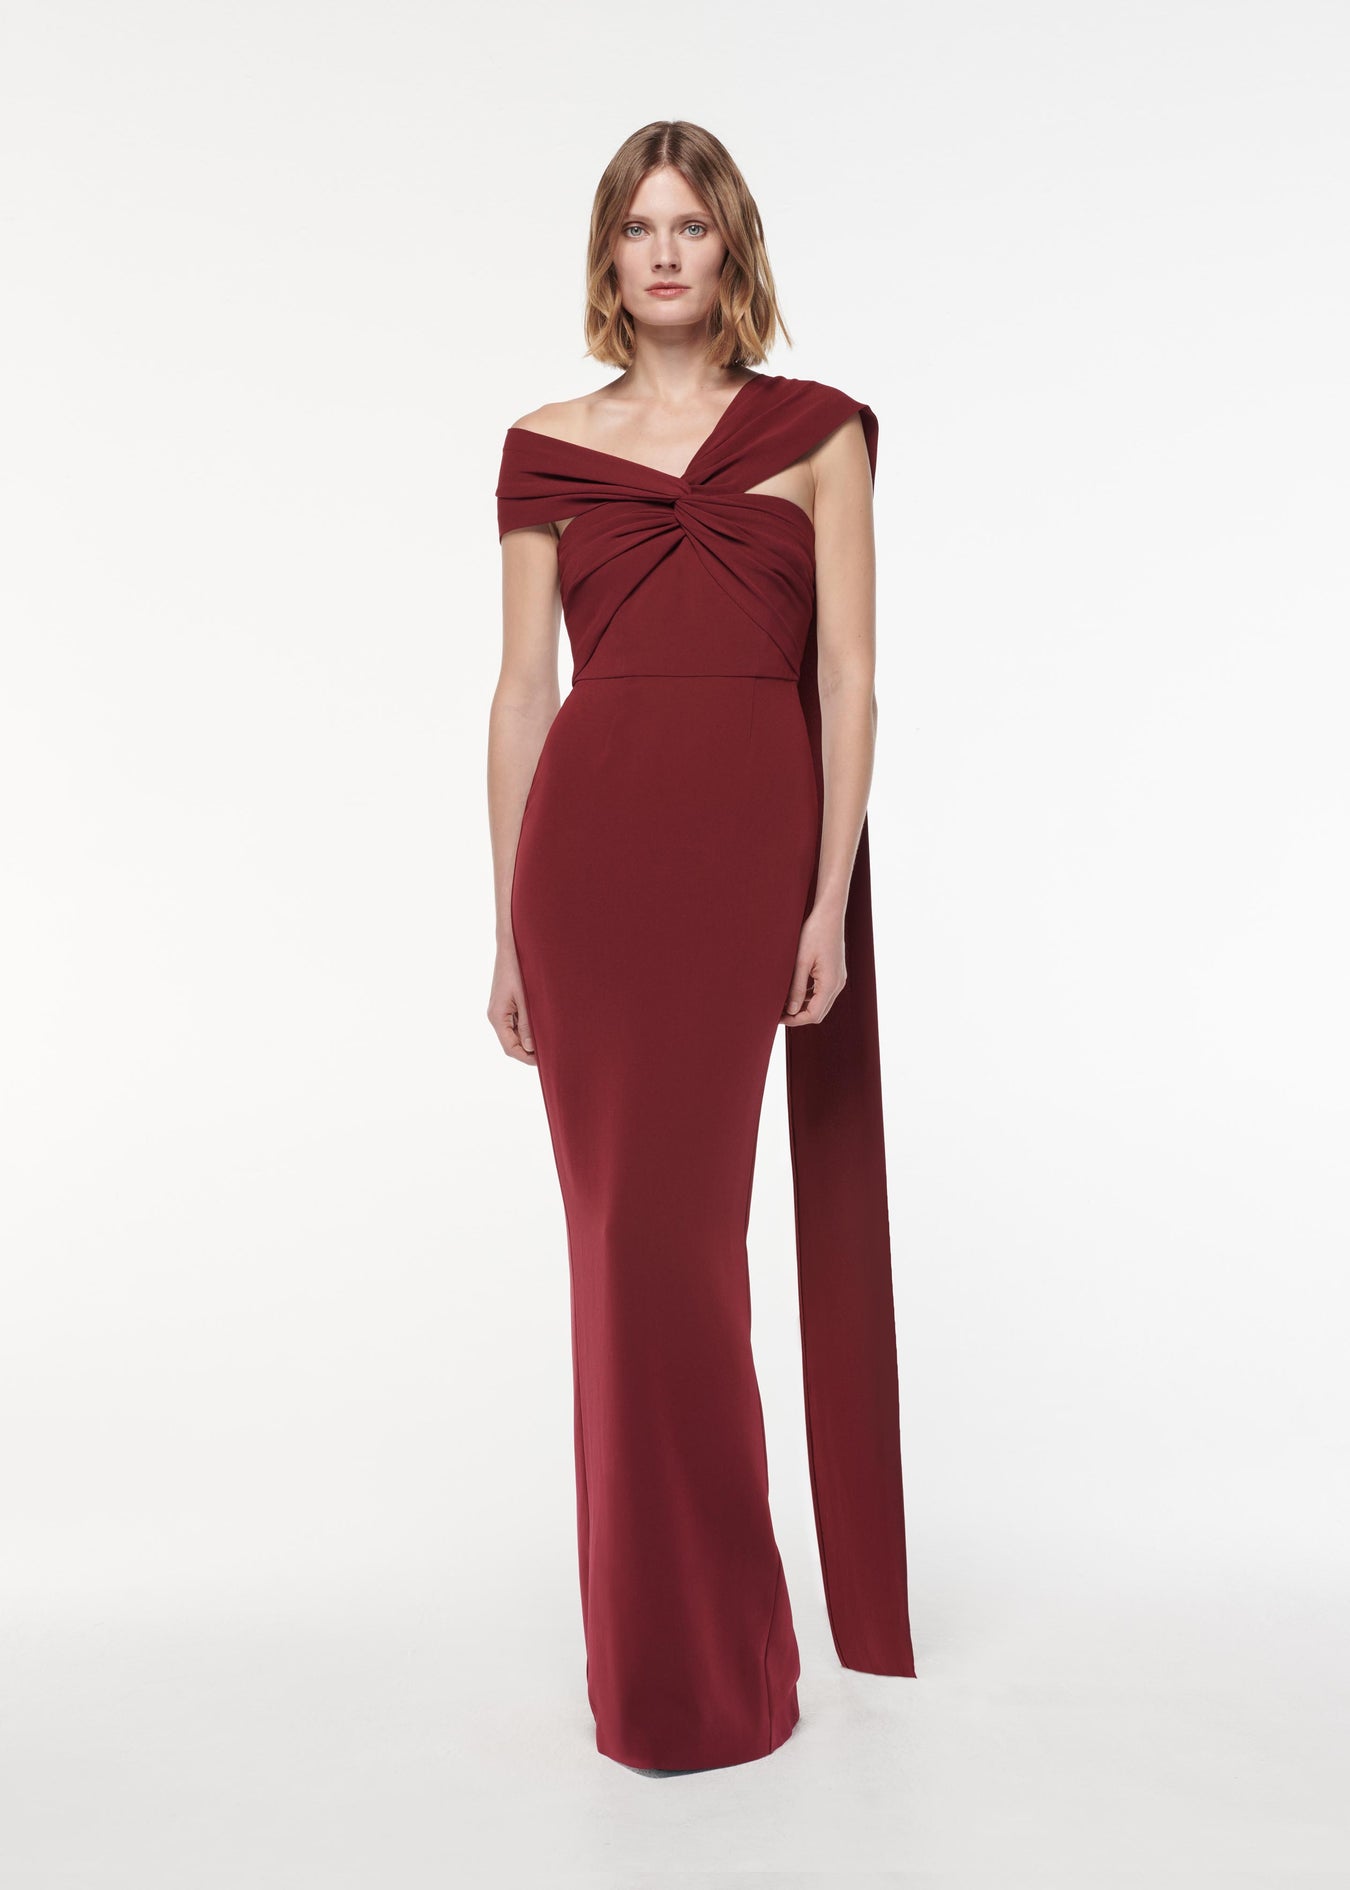 A photograph of a woman wearing a Asymmetric Light Cady Gown in Burgundy